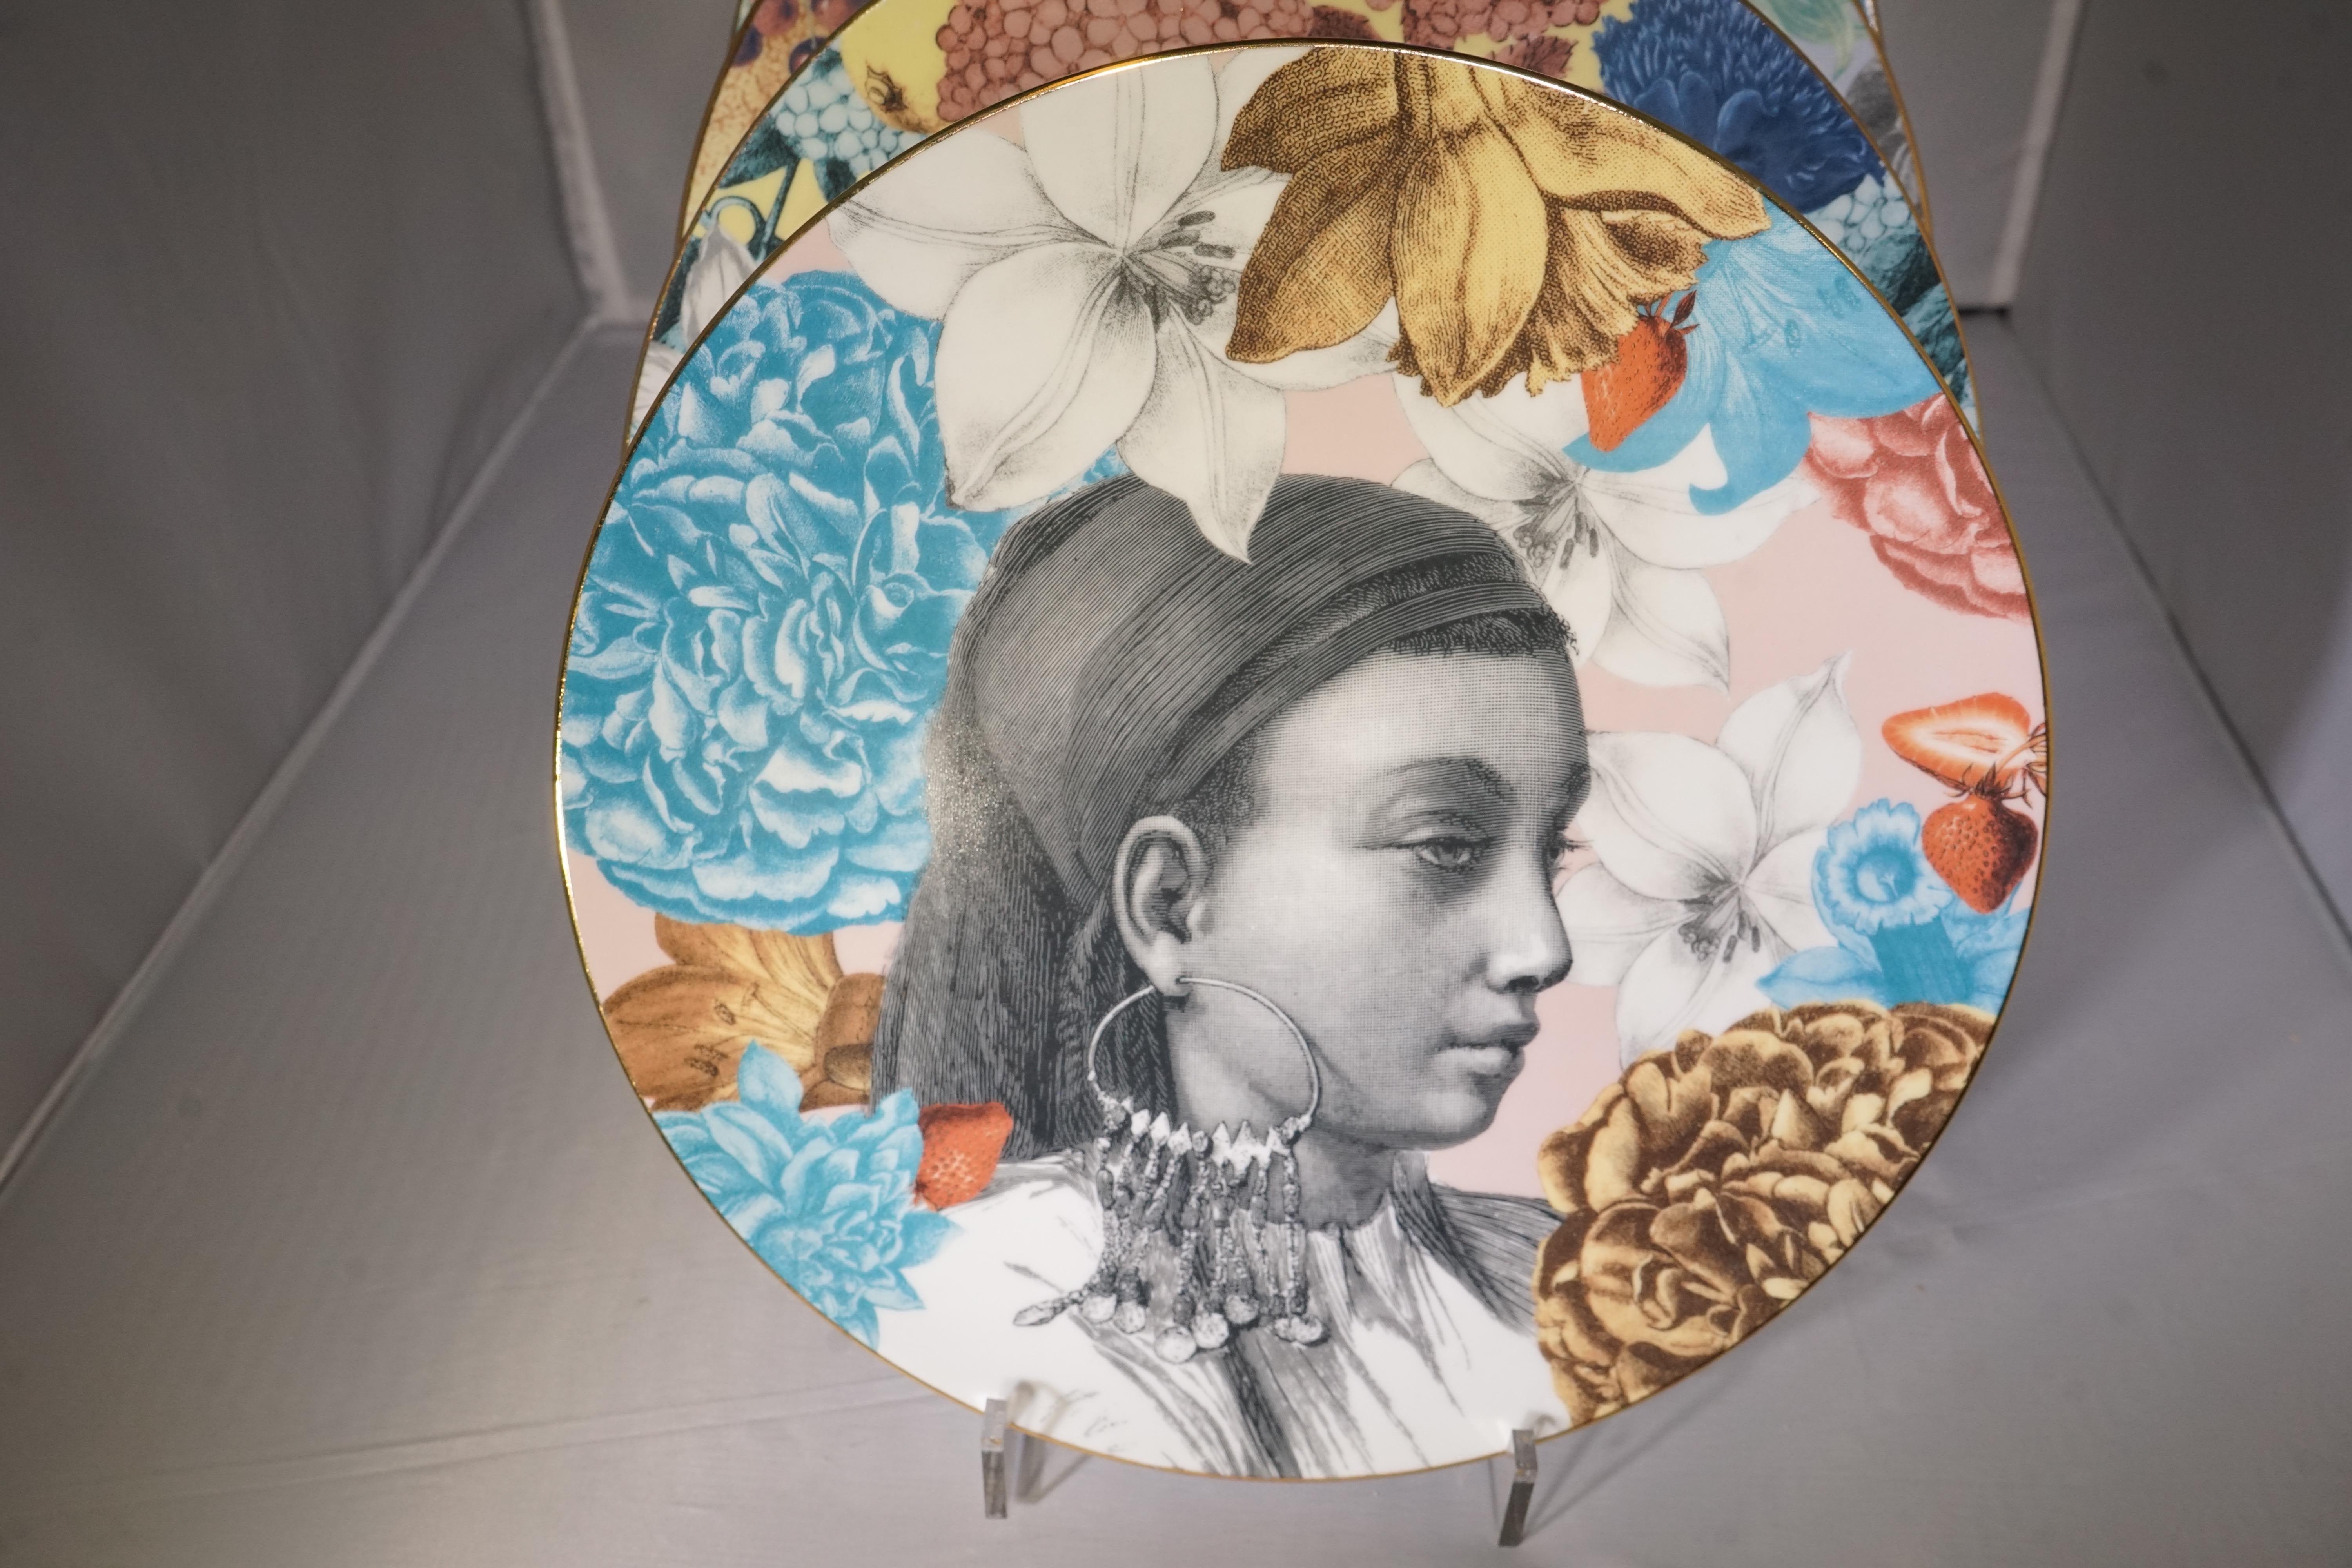 Contemporary set of 12 porcelain dinner plates featuring multi-color floral designs and black and white illustrated portraits from the 